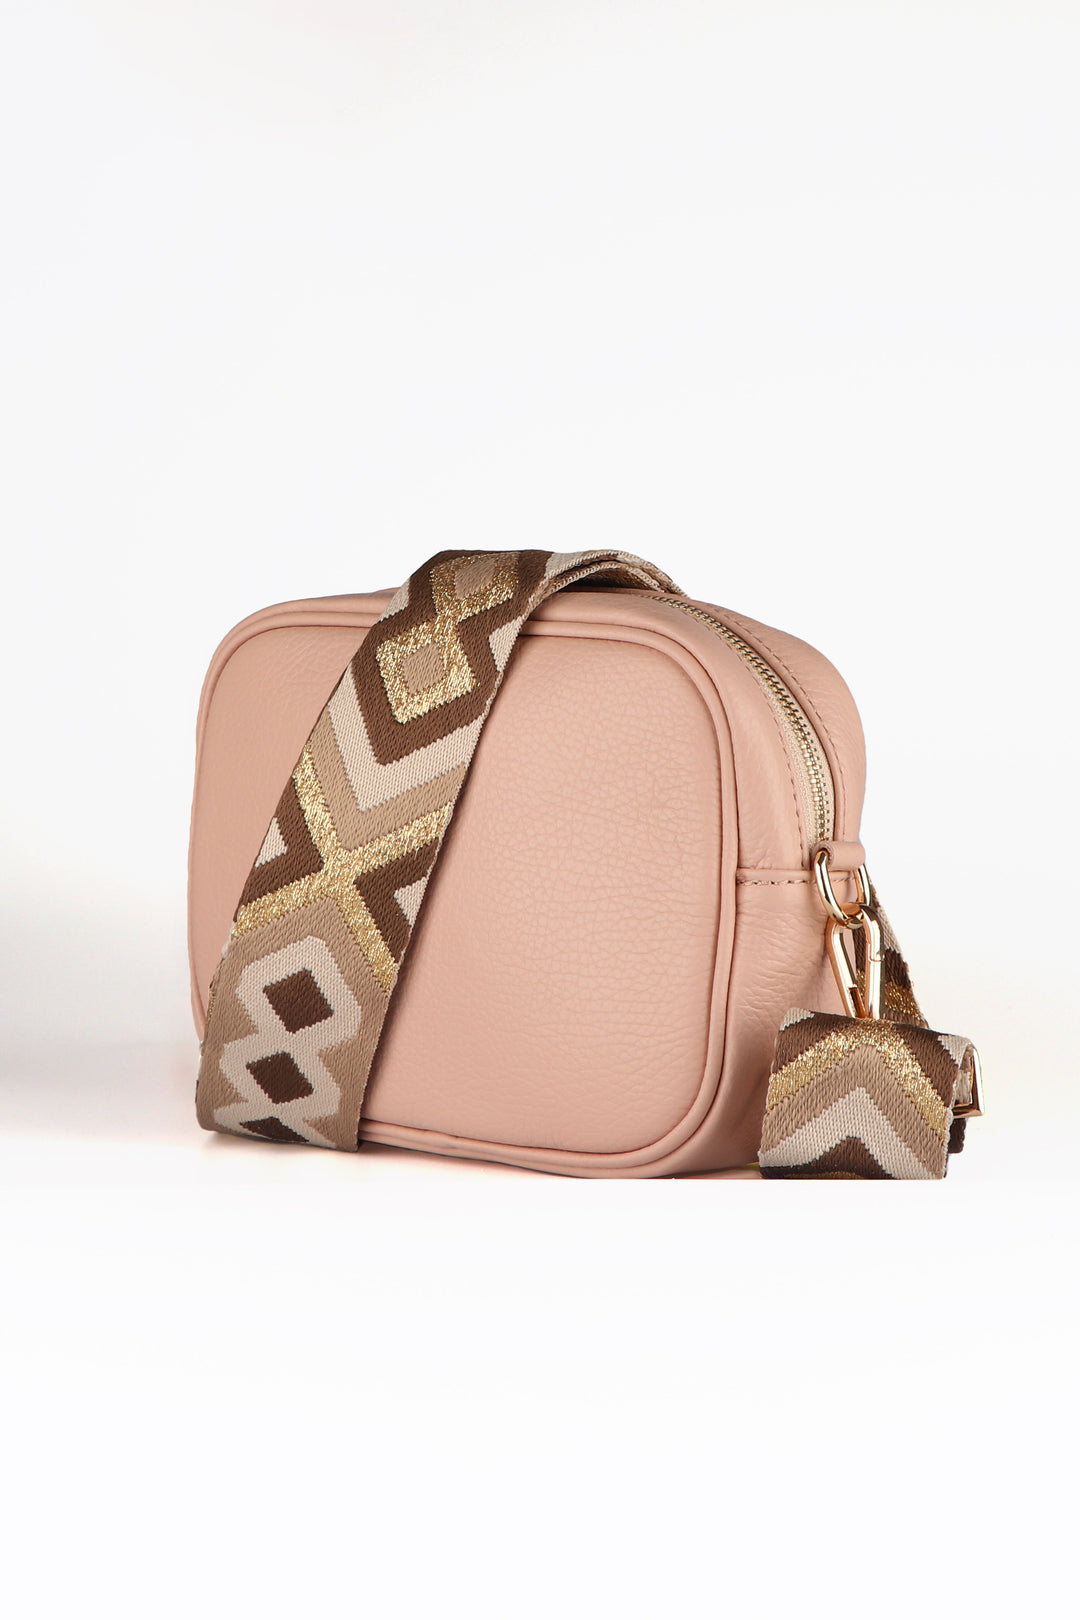 nude leather camera bag with beige and gold aztec pattern replacement strap 